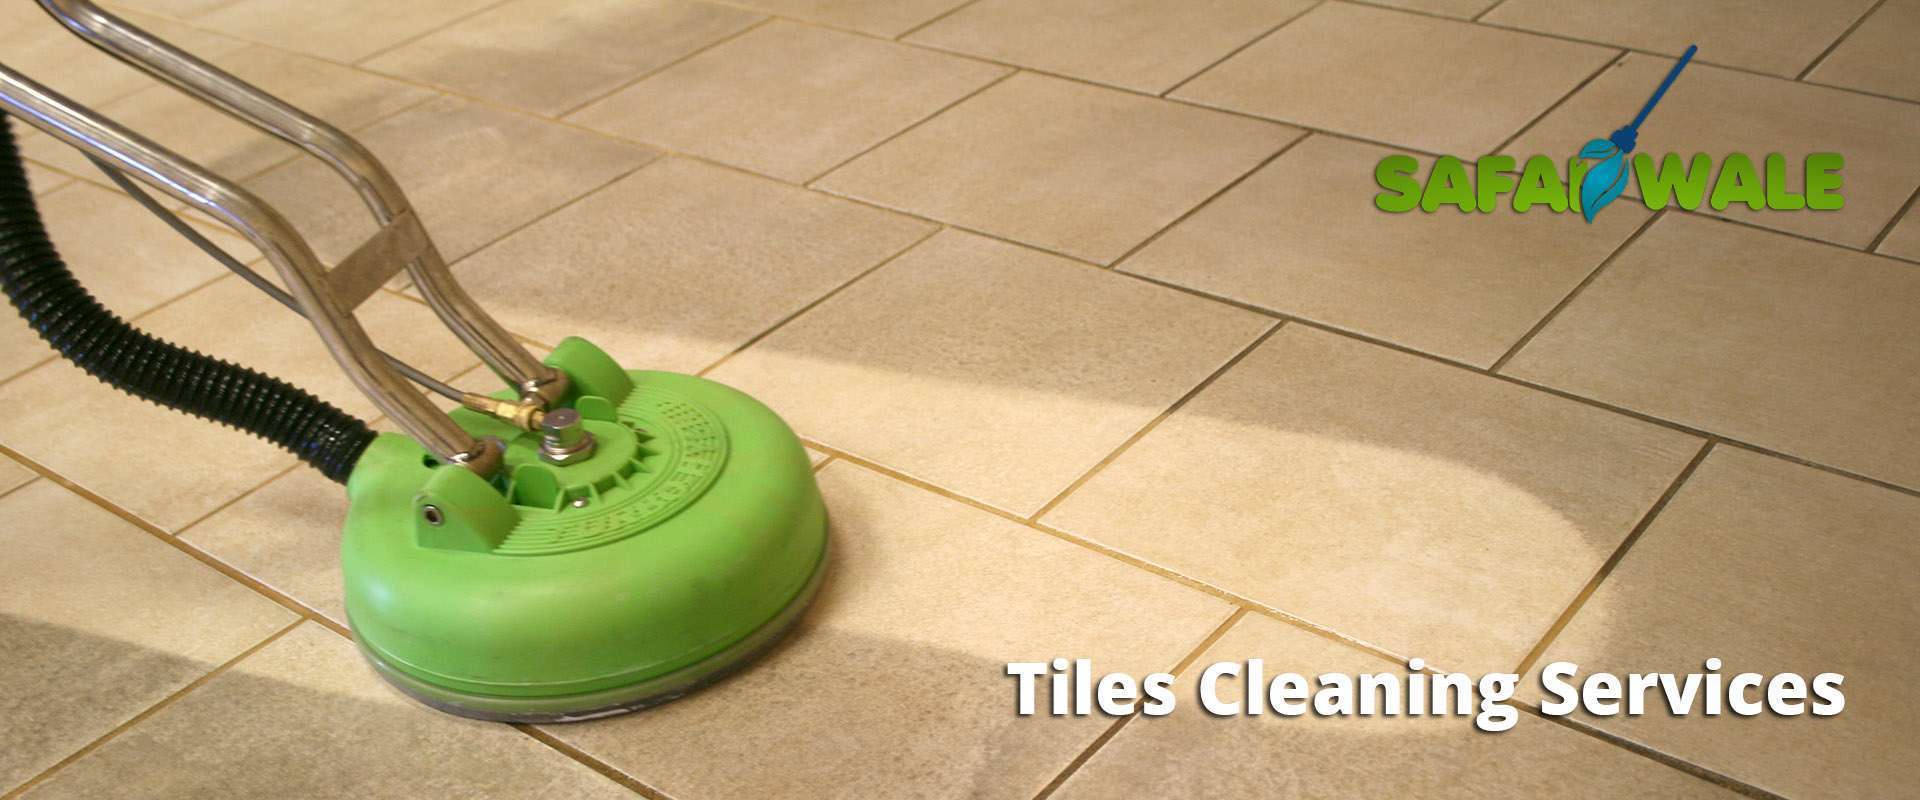 Tiles Cleaning Services In Hyderabad